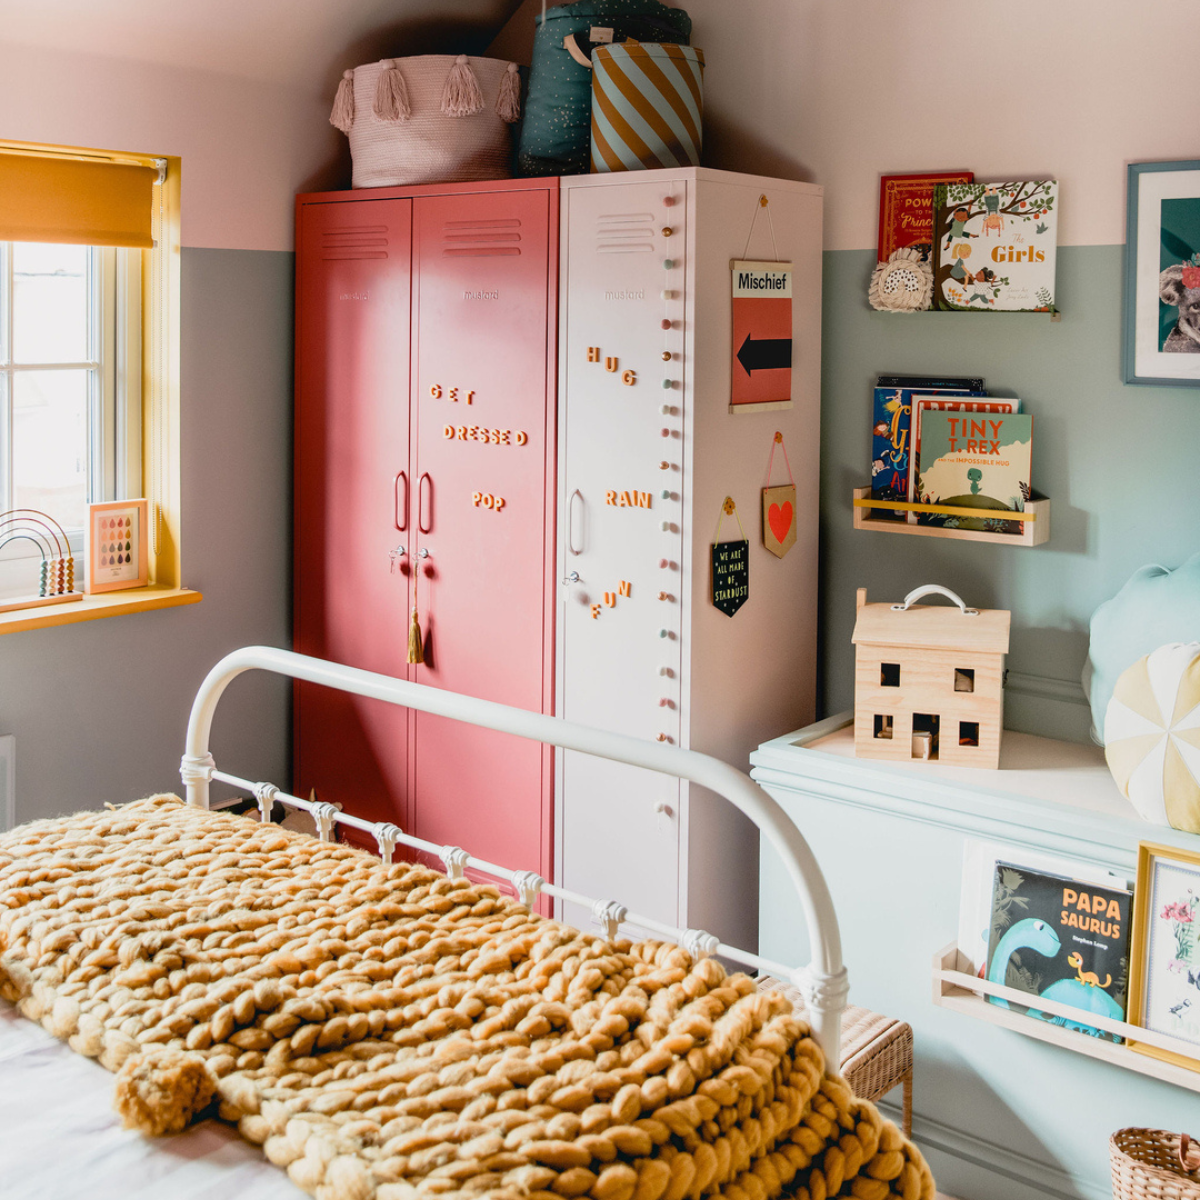 A Berry Twinny and a Blush Skinny sit side-by-side at the foot of a bed. Wordbits magnets spell out 'get dressed' on the front and colorful baskets sit on top.